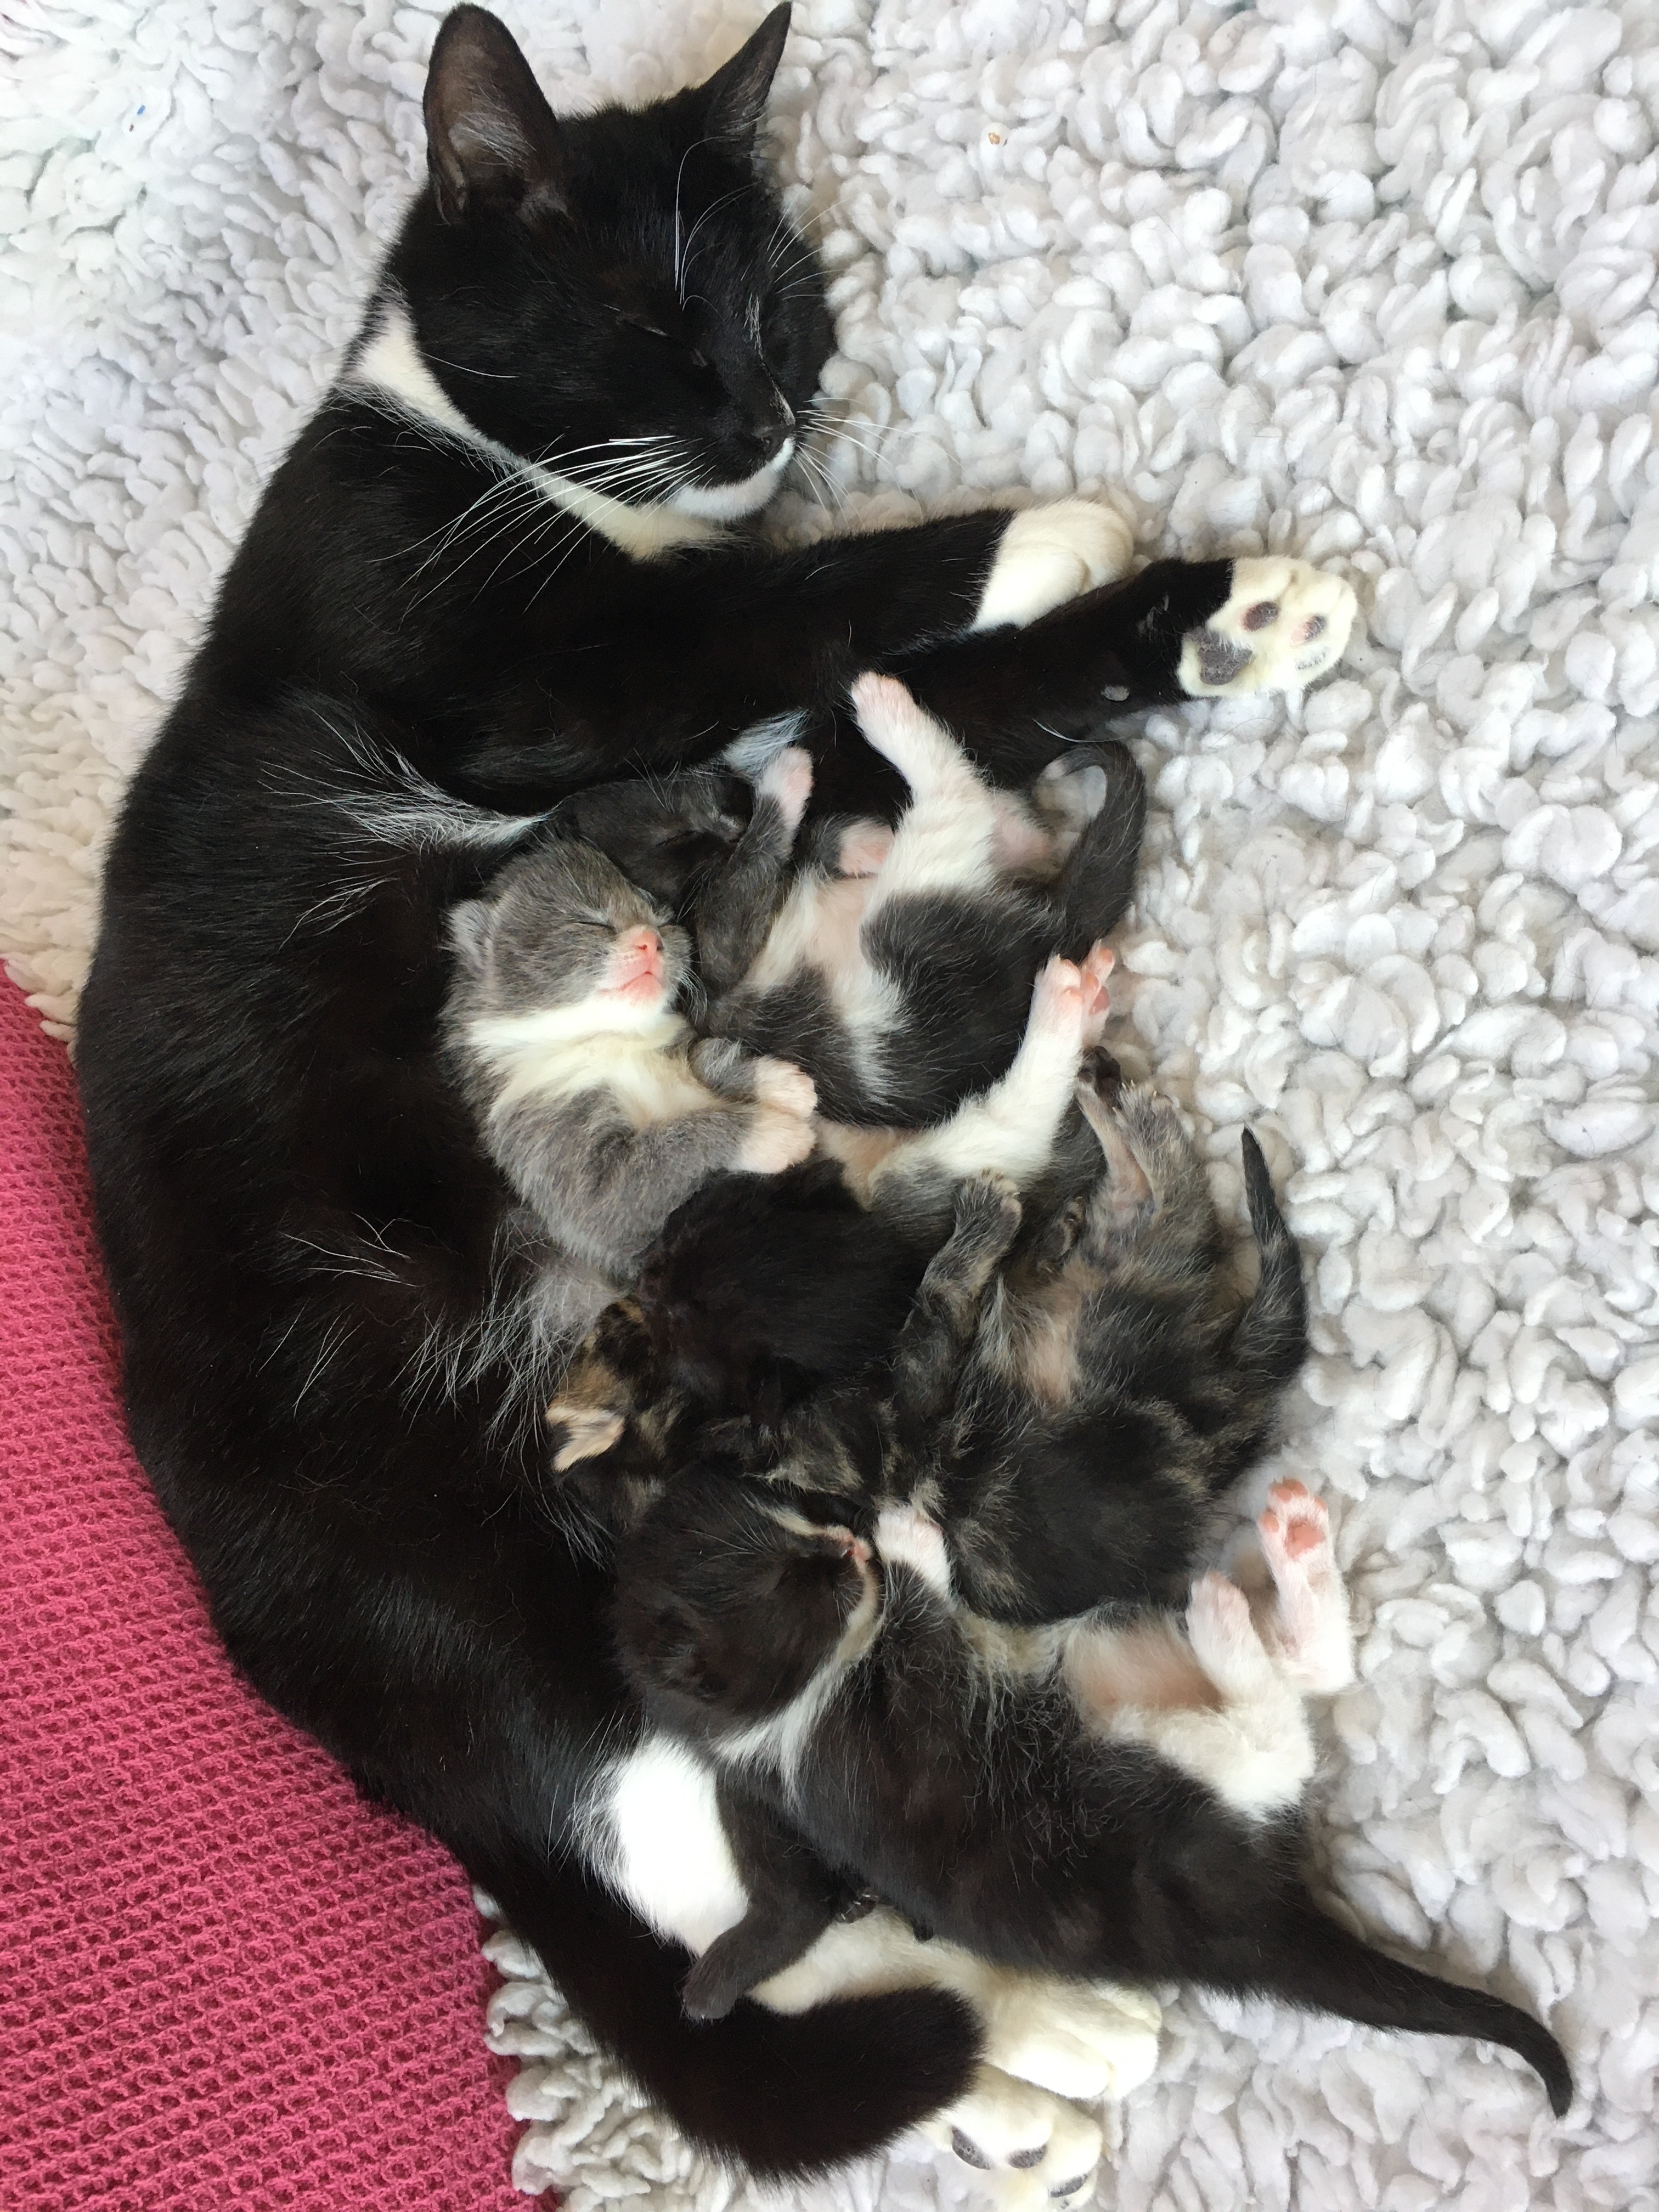 Lola with her kittens